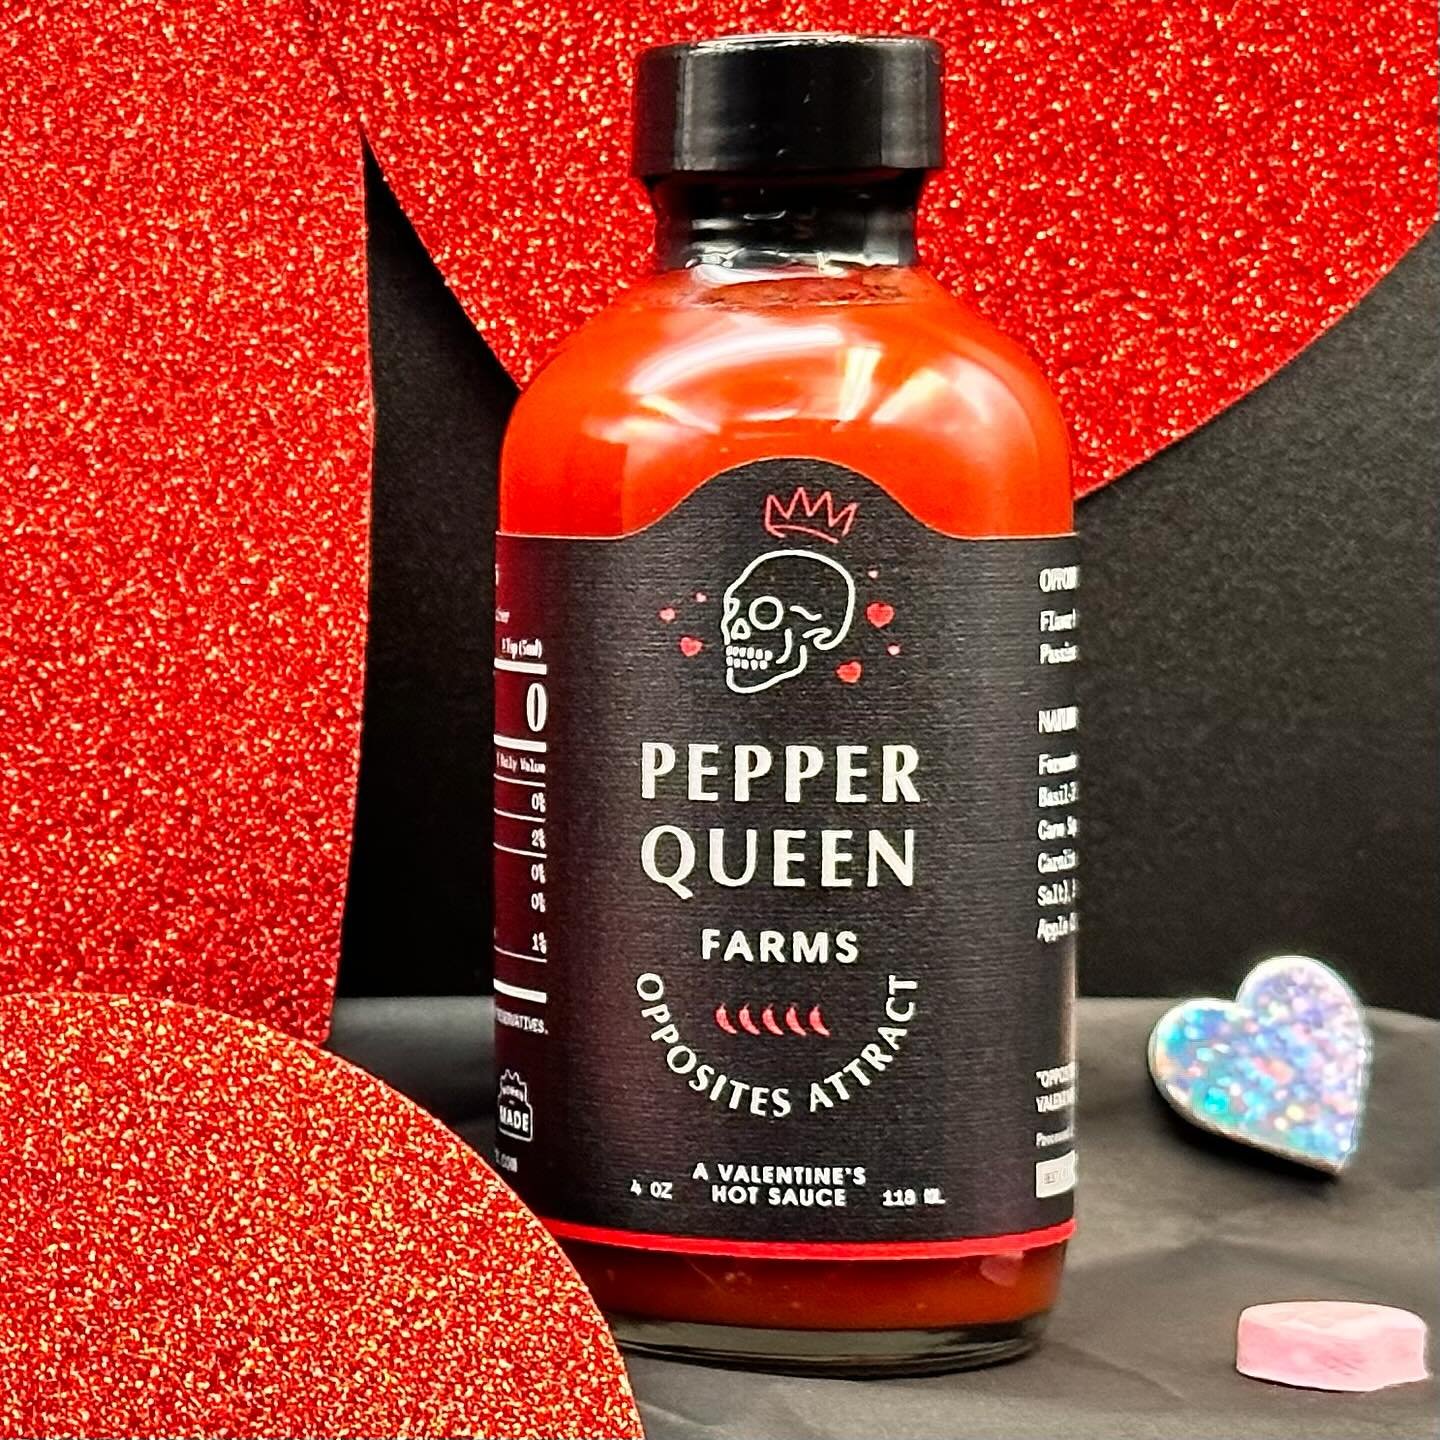 ❤️ It&rsquo;s time to spice up your love life ❤️
&bull;
&bull;
&bull;

#carolinareaper #bemine #hotsauce #pepperqueen